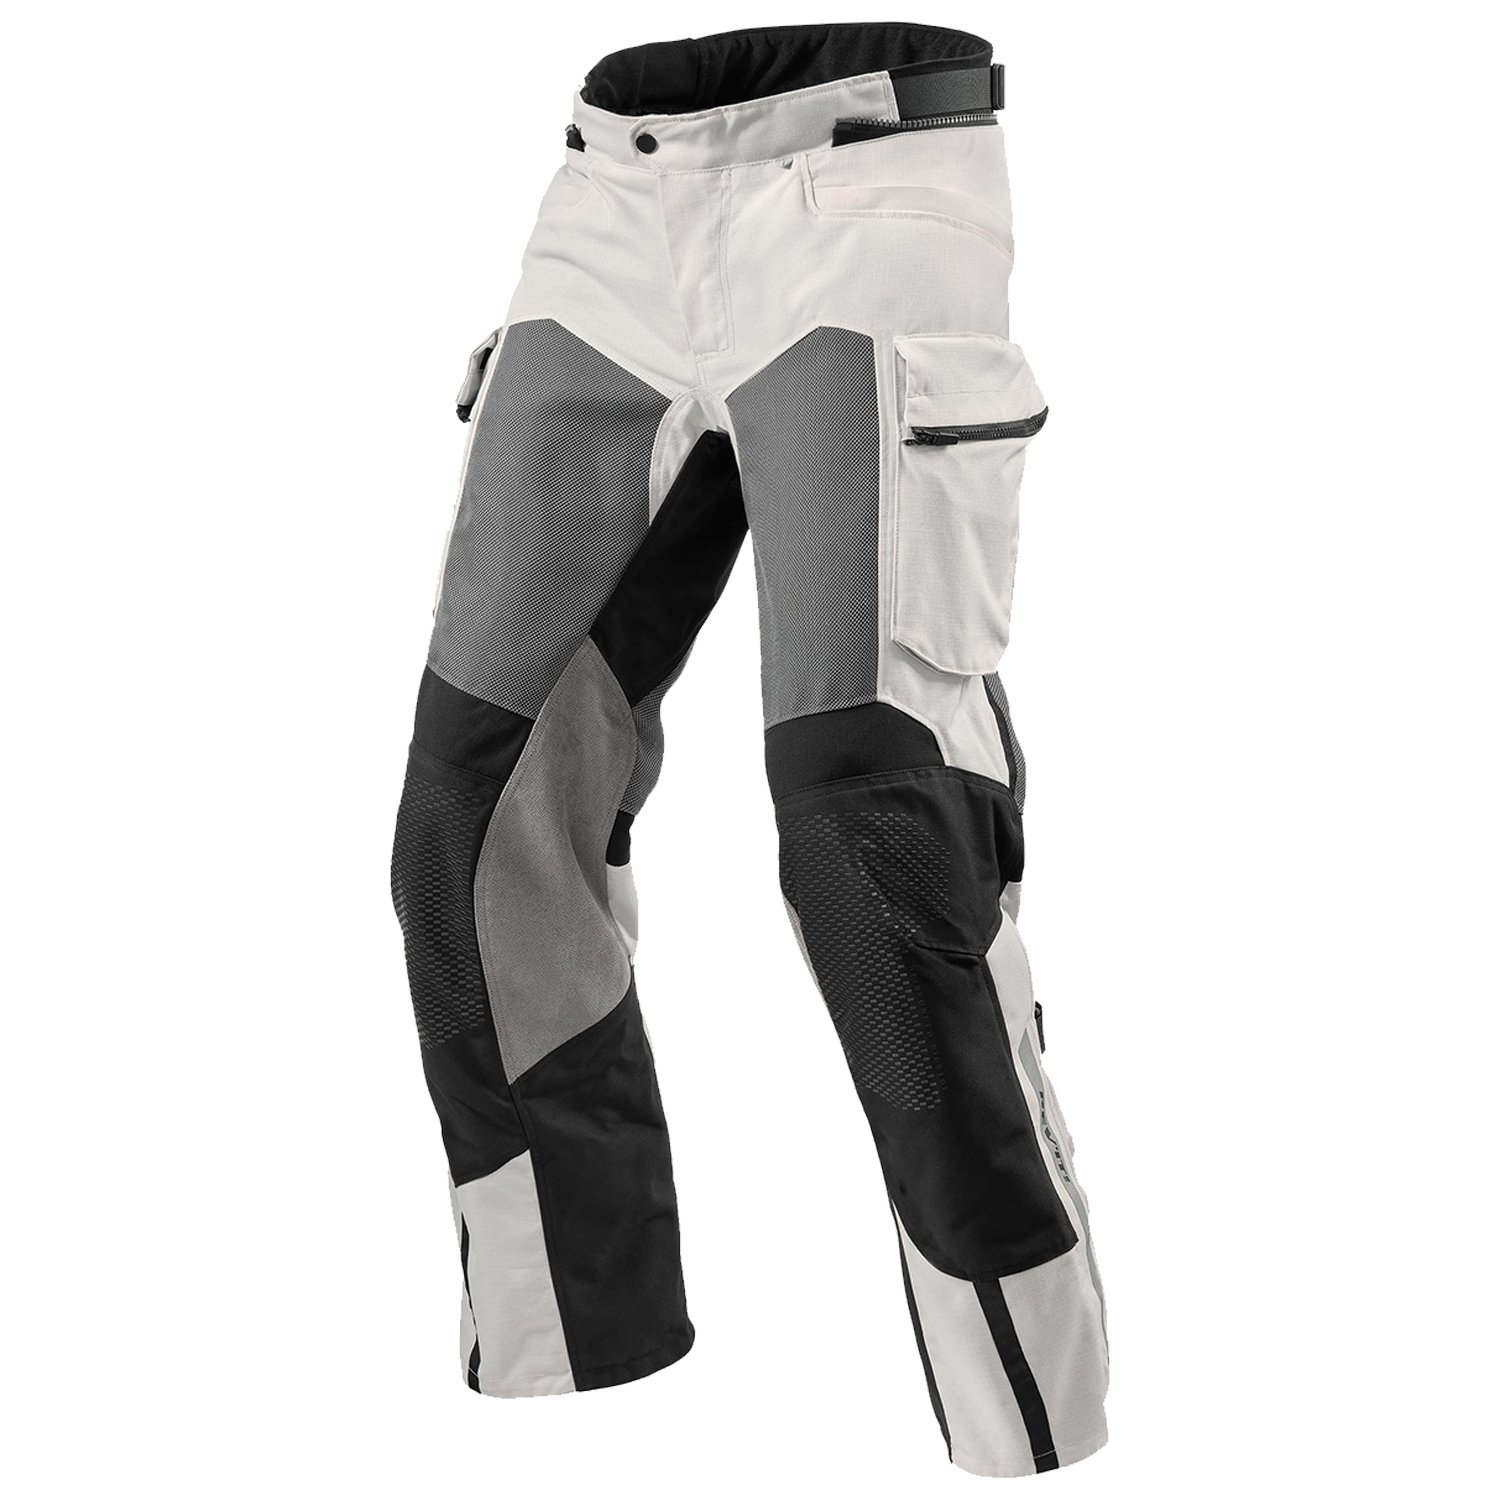 Image of REV'IT! Cayenne 2 Silver Motorcycle Pants Size 2XL ID 8700001346481